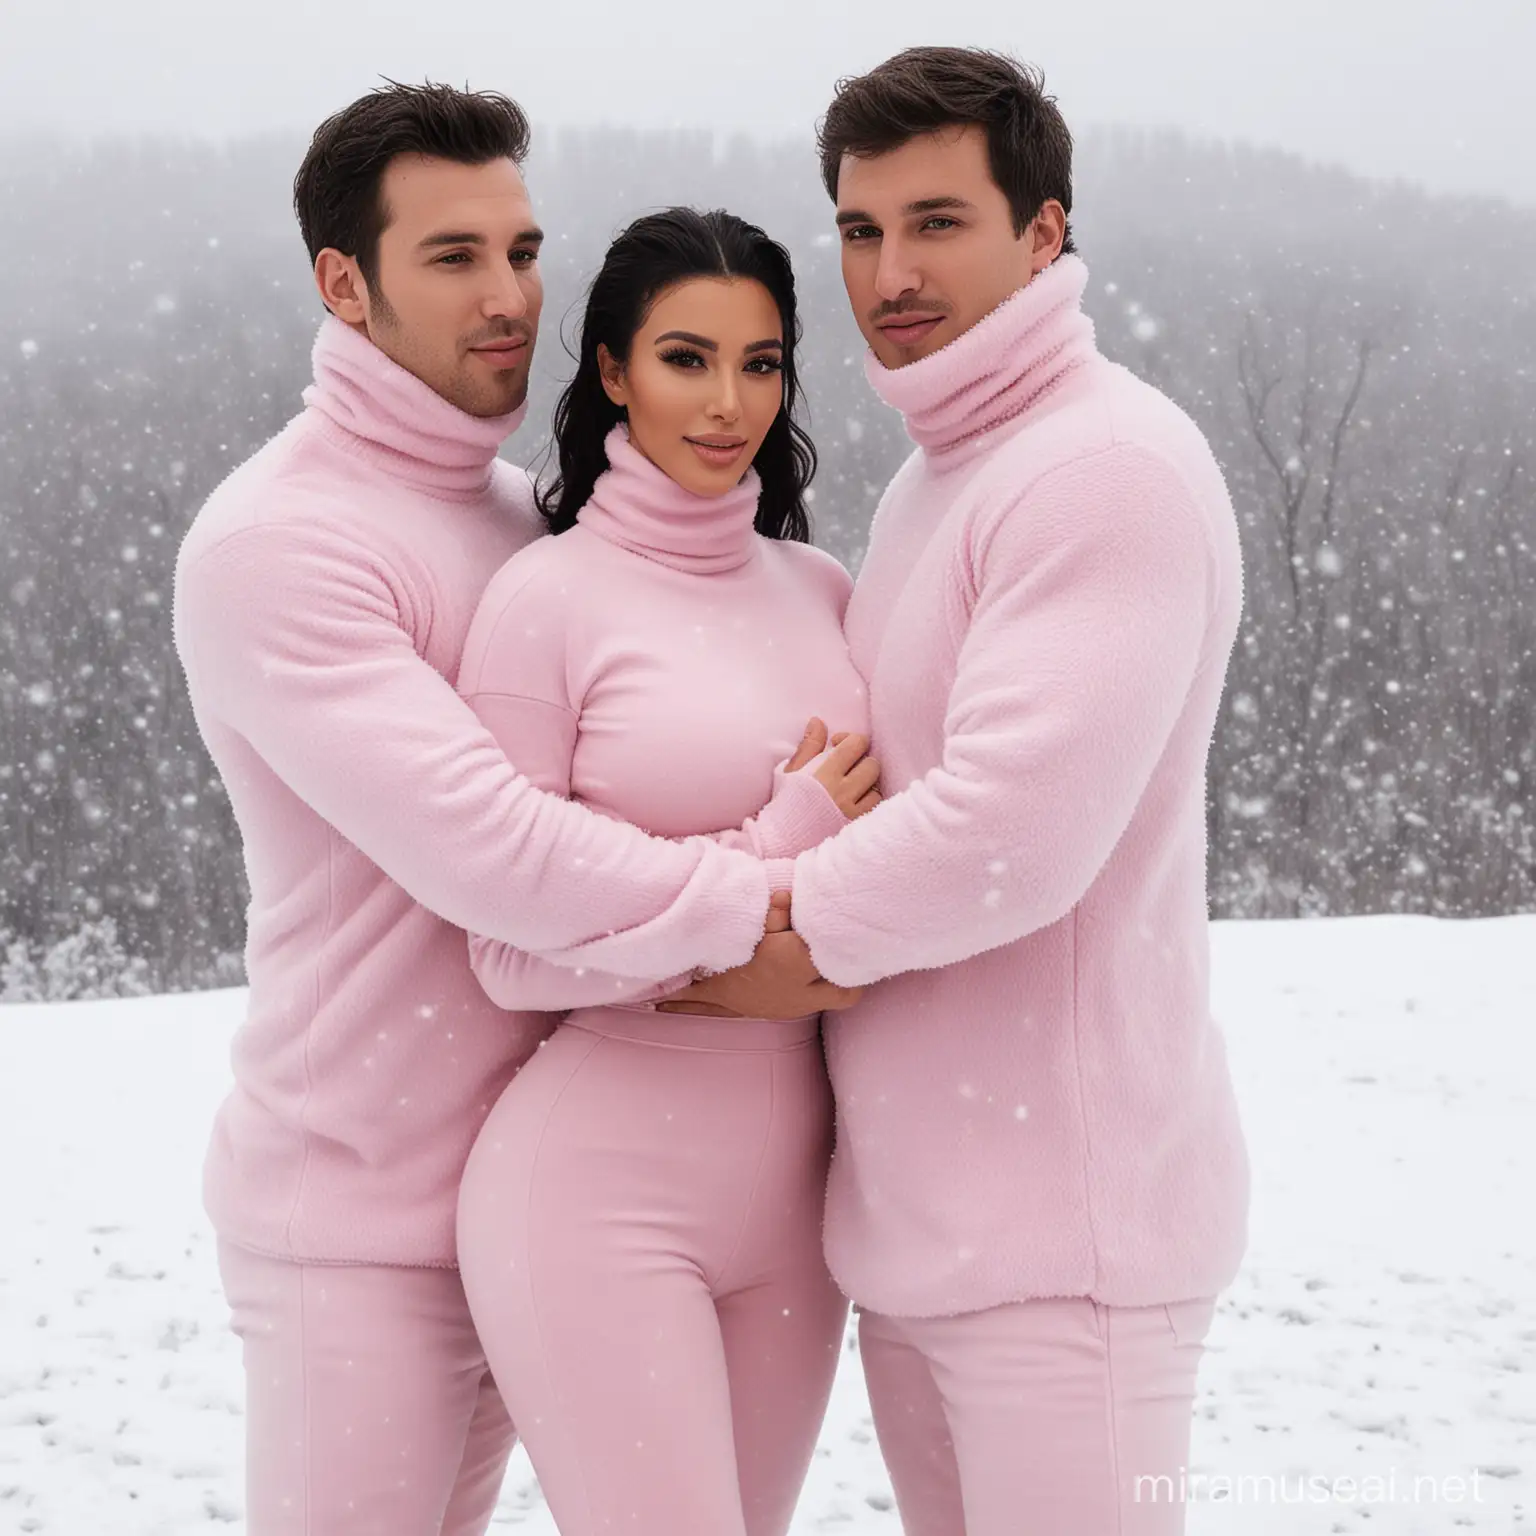 2 guys and 1Kim Kardashian, kim in the middle all in fuzzy pink turtleneck hugging in the snow 